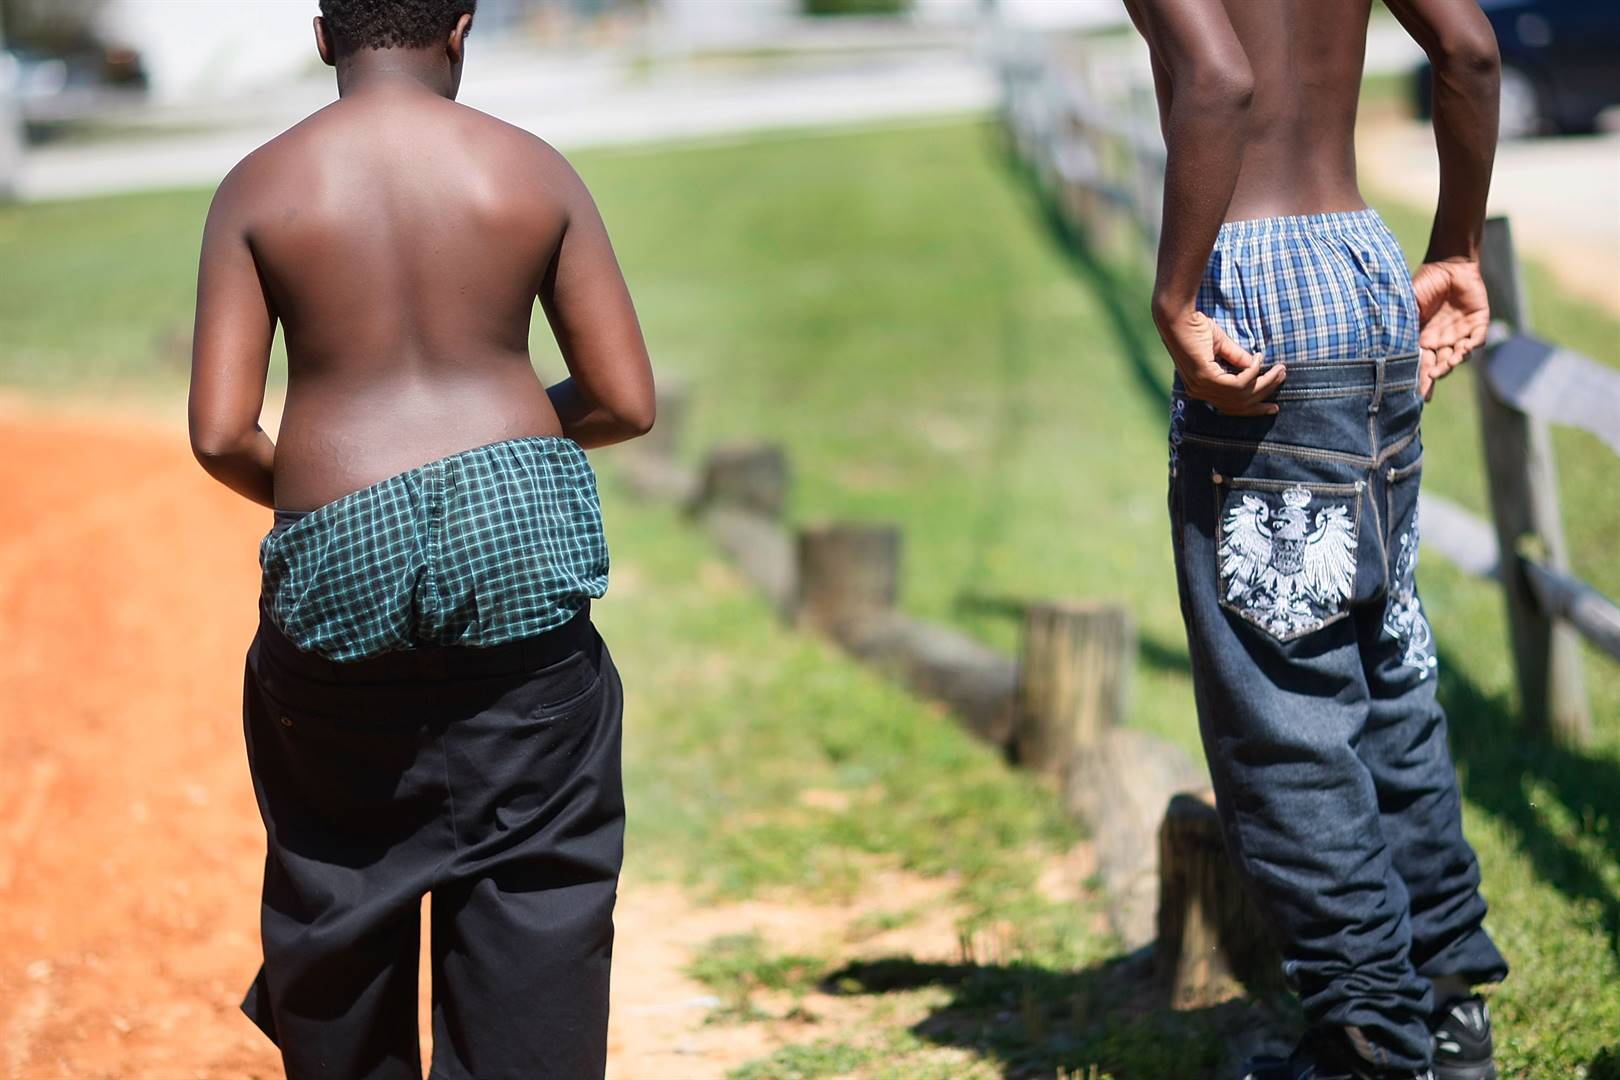 Youngsters wear their trousers with underwear showing. Photo: Joe Raedle/Getty Images